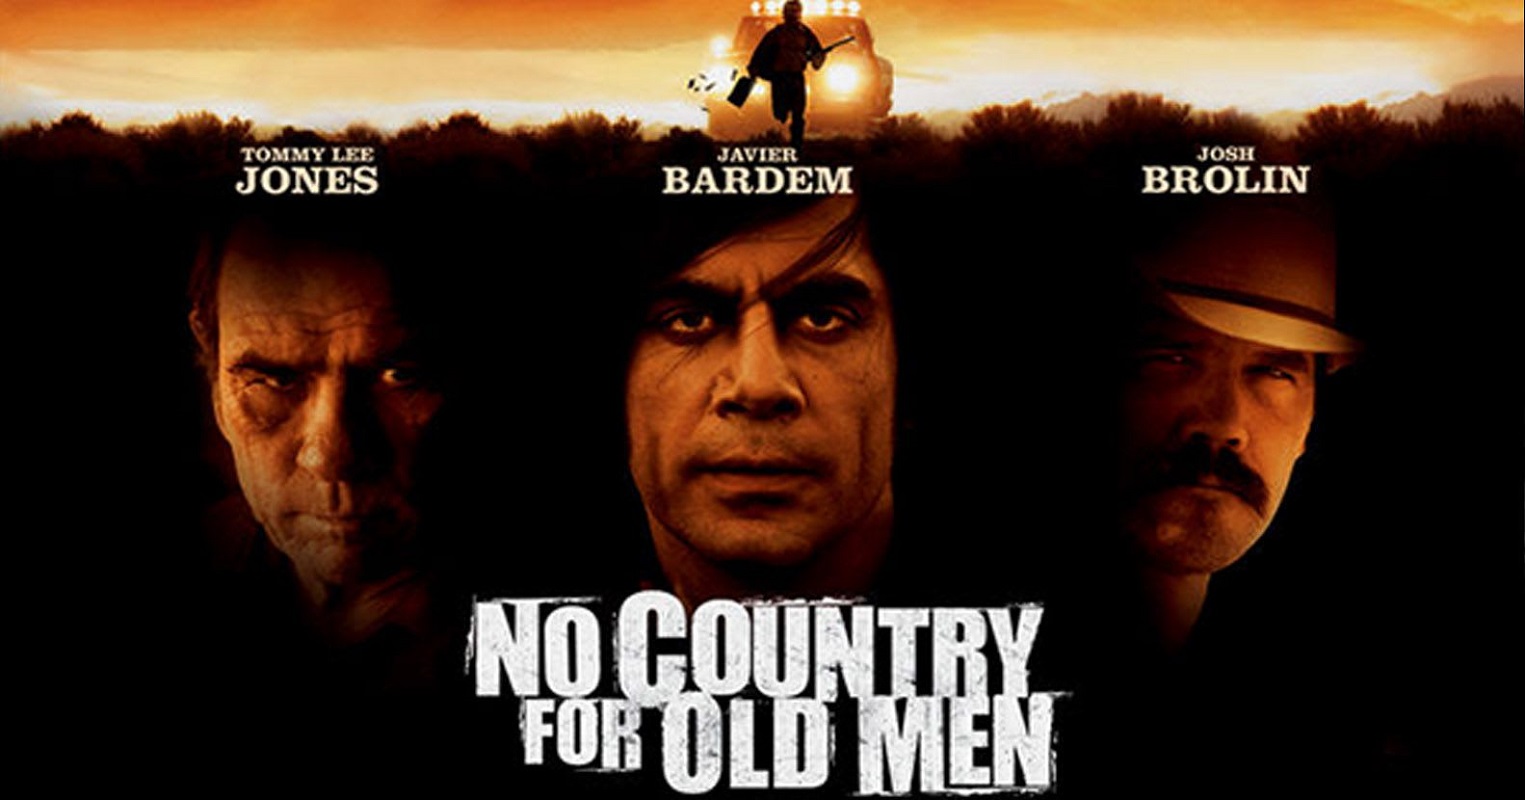 Име:  no country for old men.jpg
Разглеждания: 99
Размер:  169,6 КБ